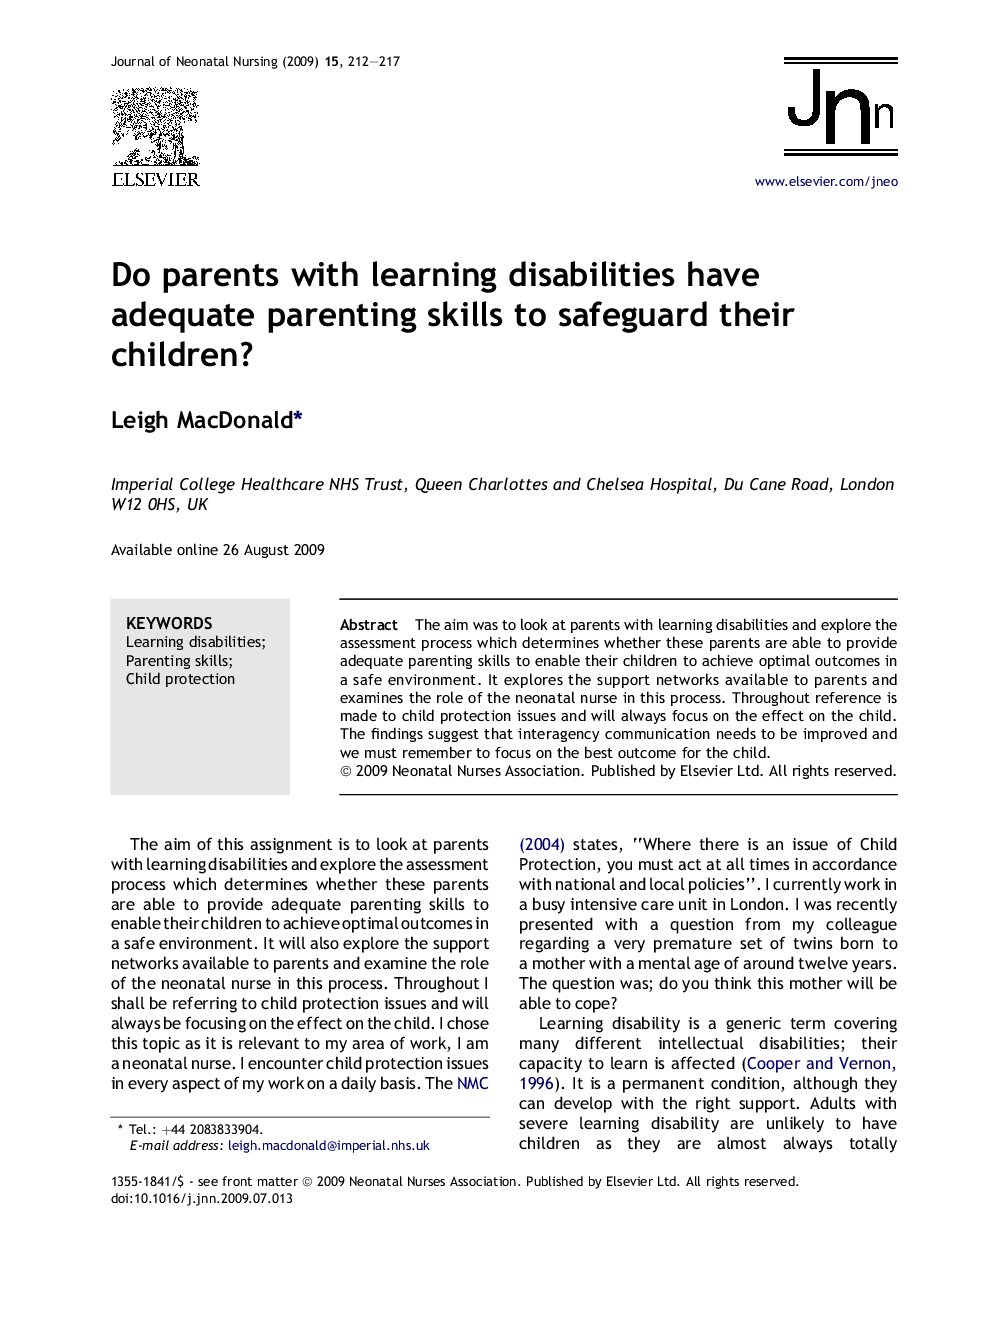 Do parents with learning disabilities have adequate parenting skills to safeguard their children?